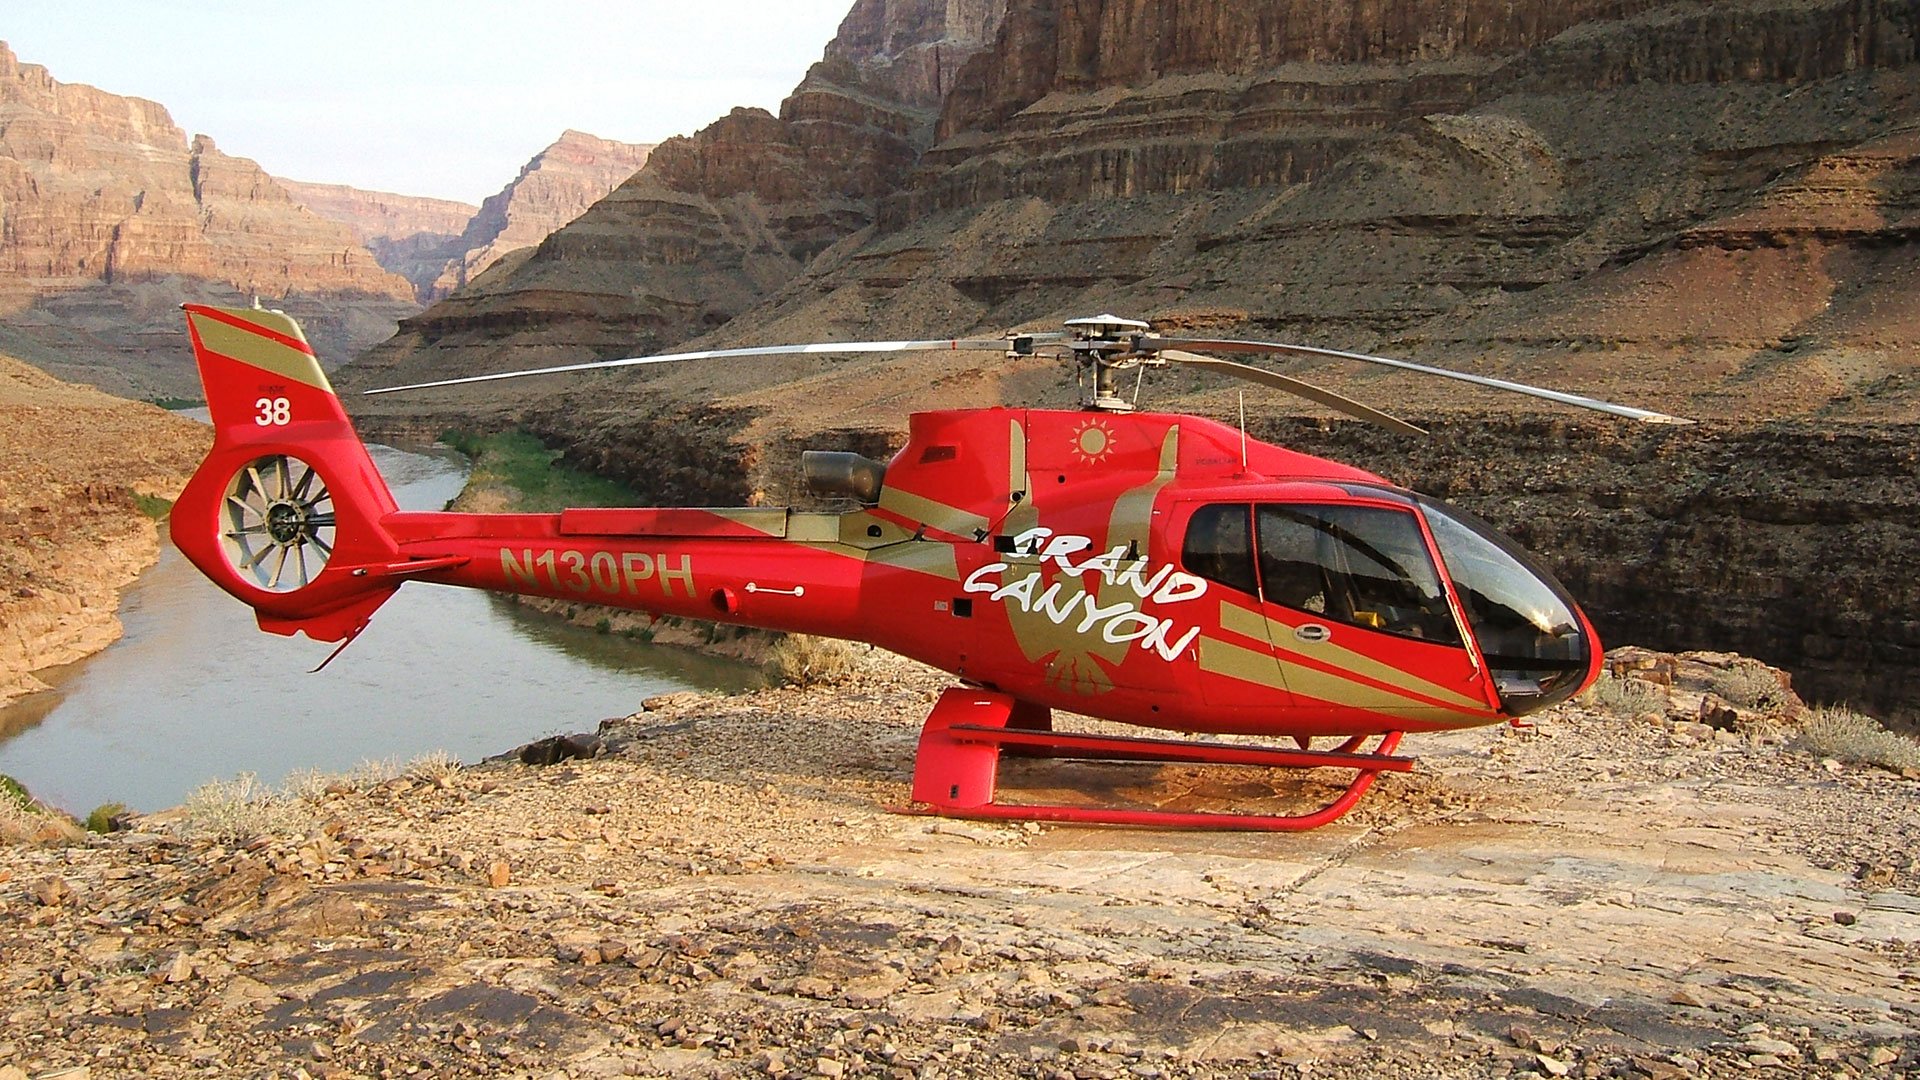 An EC-130 helicopter landed at the bottom of the Grand Canyon with the Colorado River in the background.